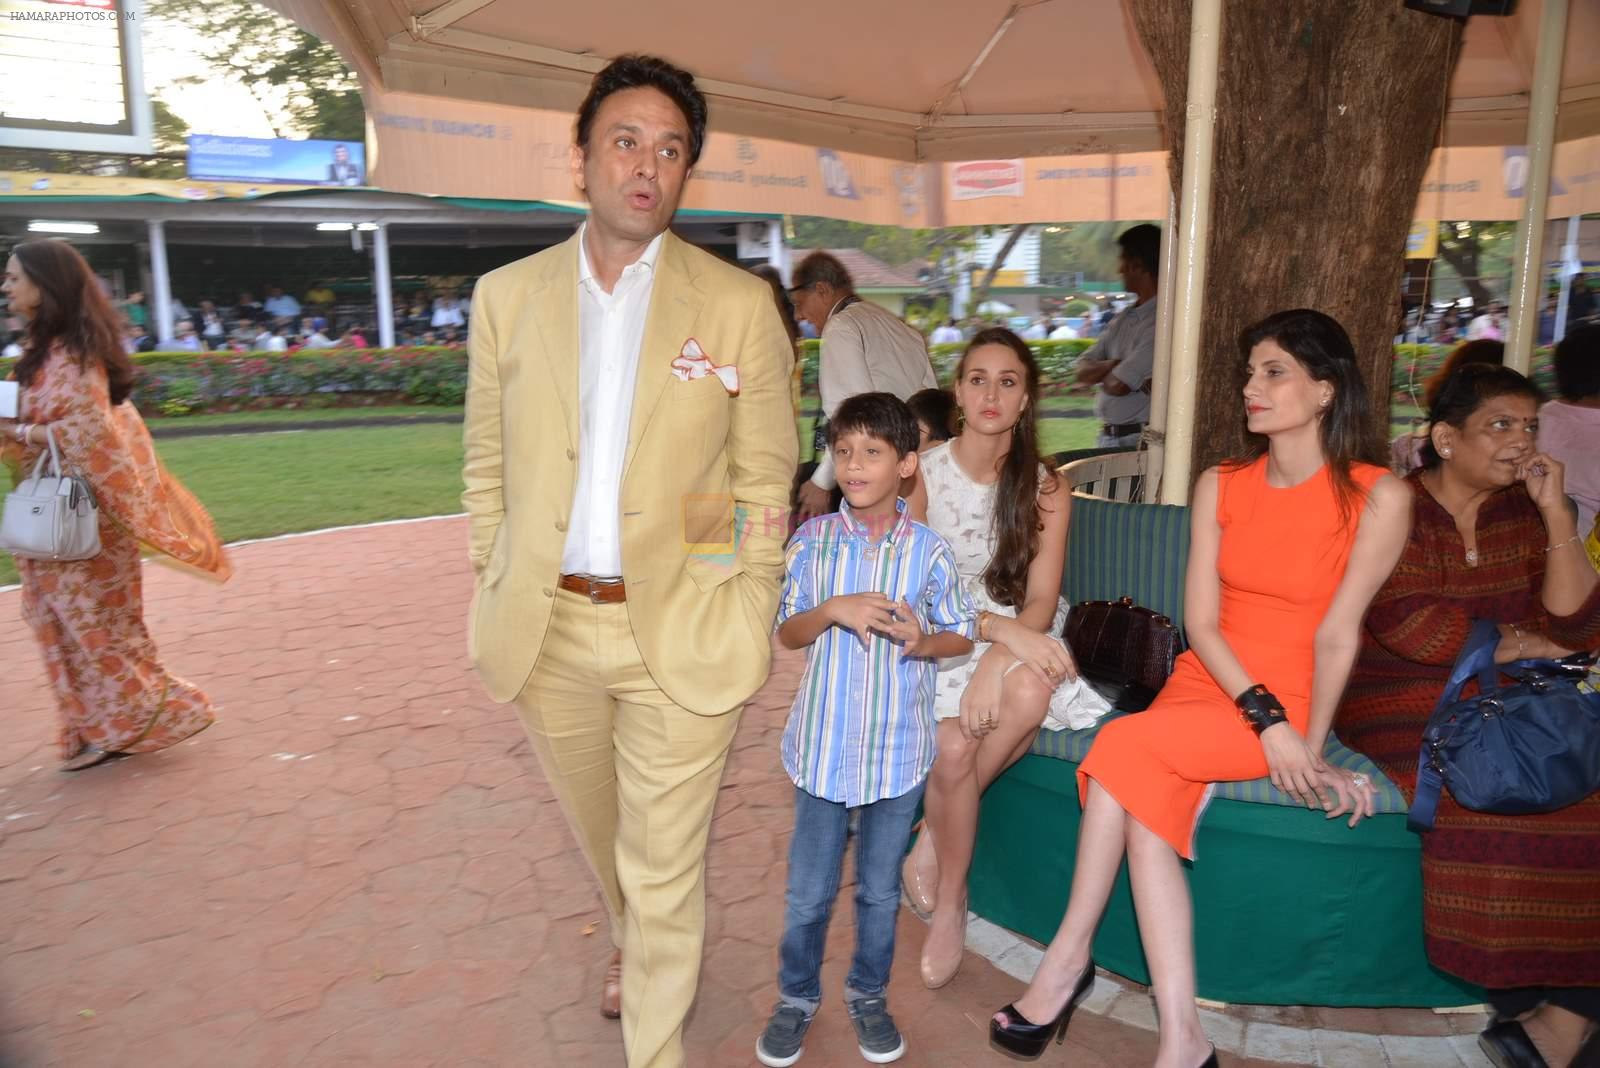 Ness Wadia at Gladrags Mrs India contest and Wadia cup in RWITC on 8th March 2015